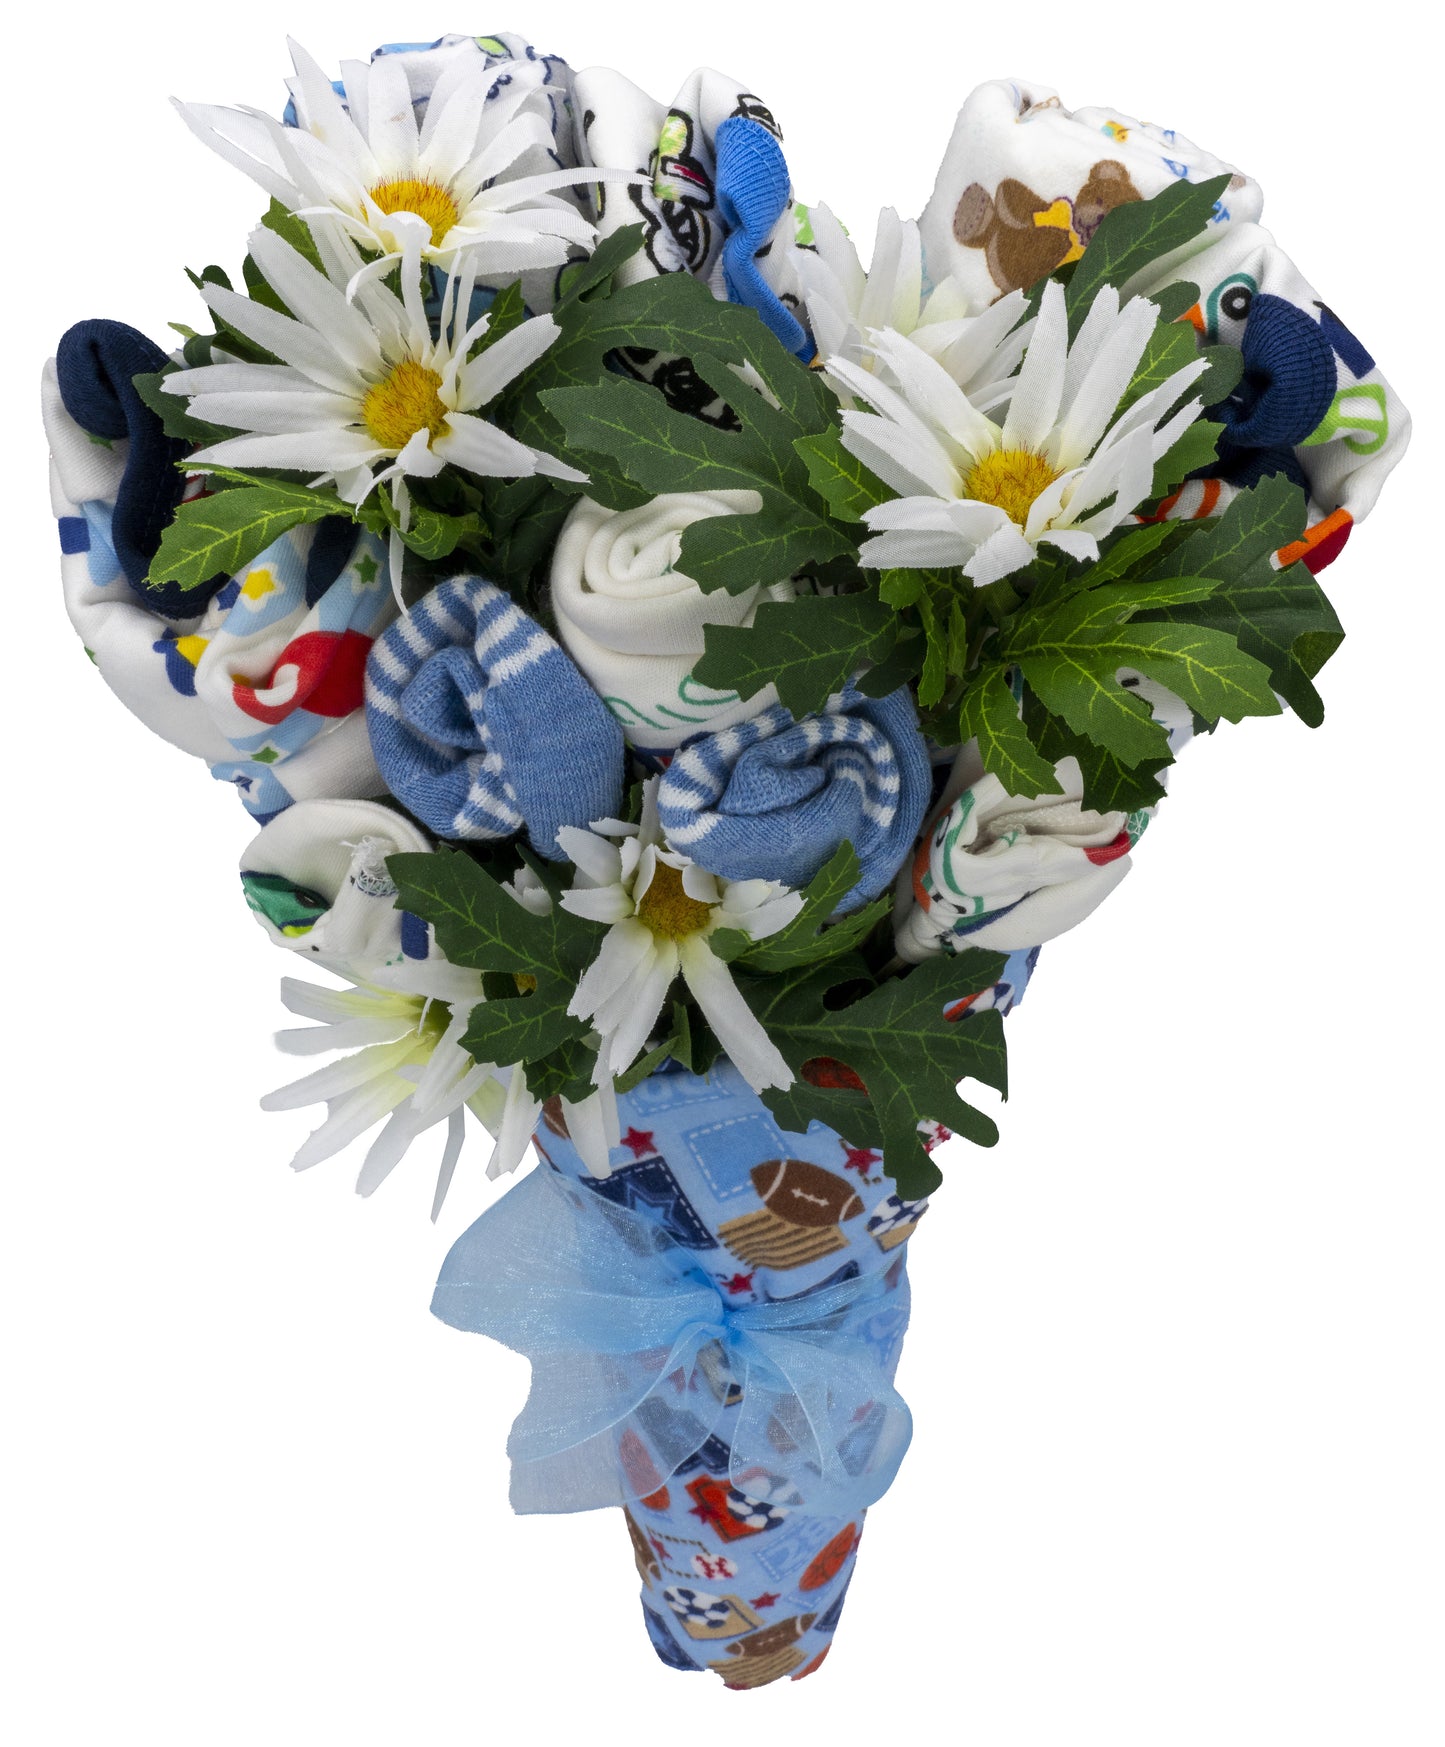 Baby Blossom Clothing Flower Bouquet, New Baby Boy Gift With Baby Clothing Arranged Like Celebration Flowers, Creative Unique Baby Gift For New Parents